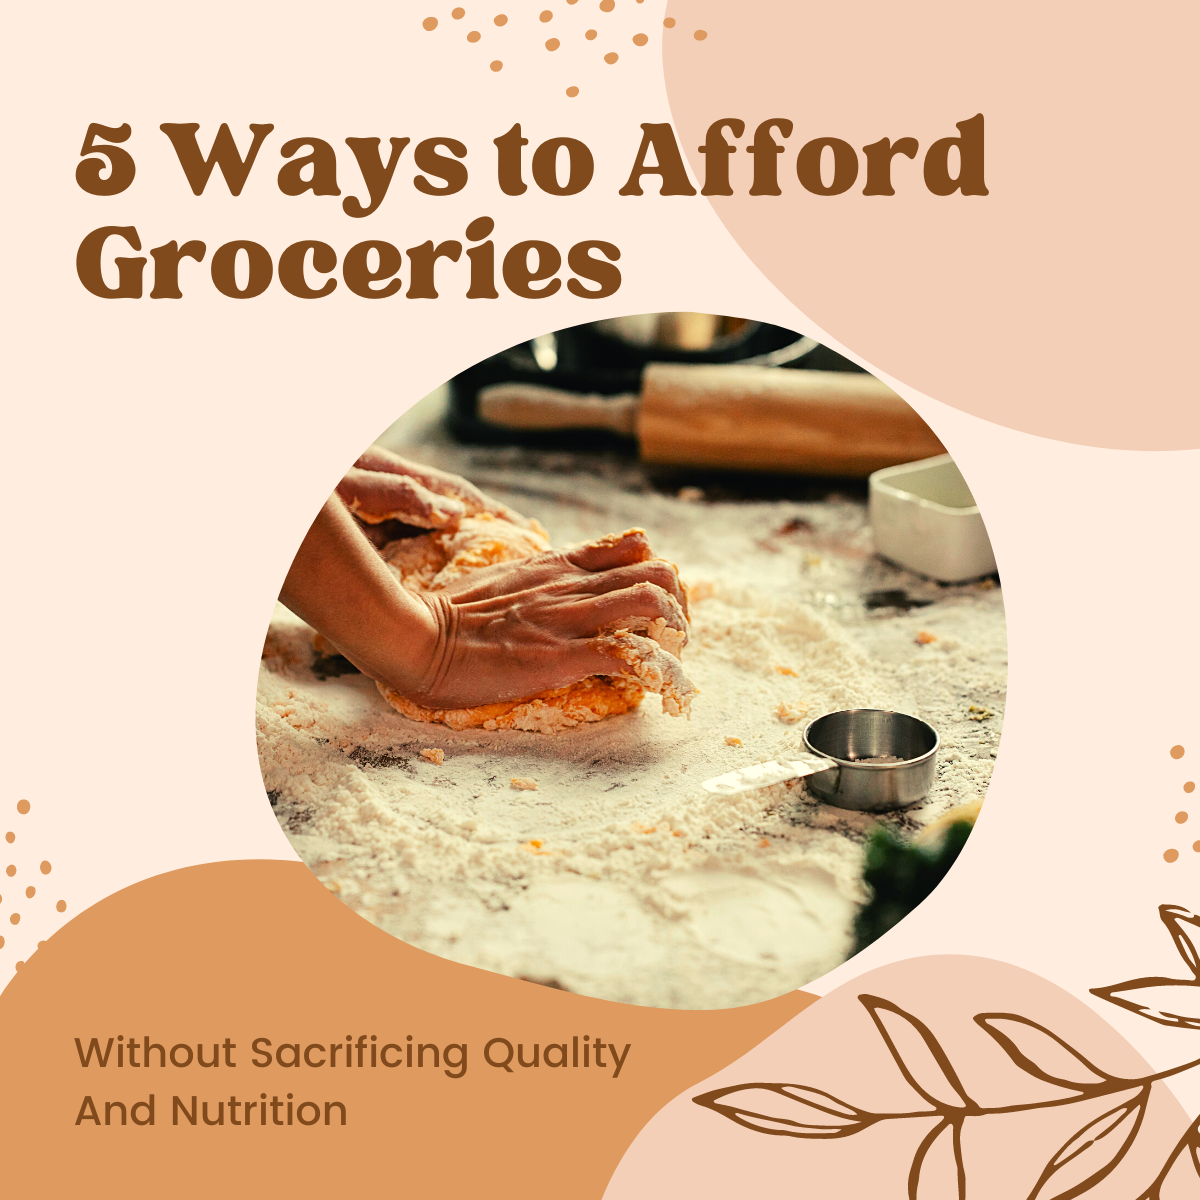 5 Ways to Afford Groceries Without Sacrificing Quality And Nutrition grafic